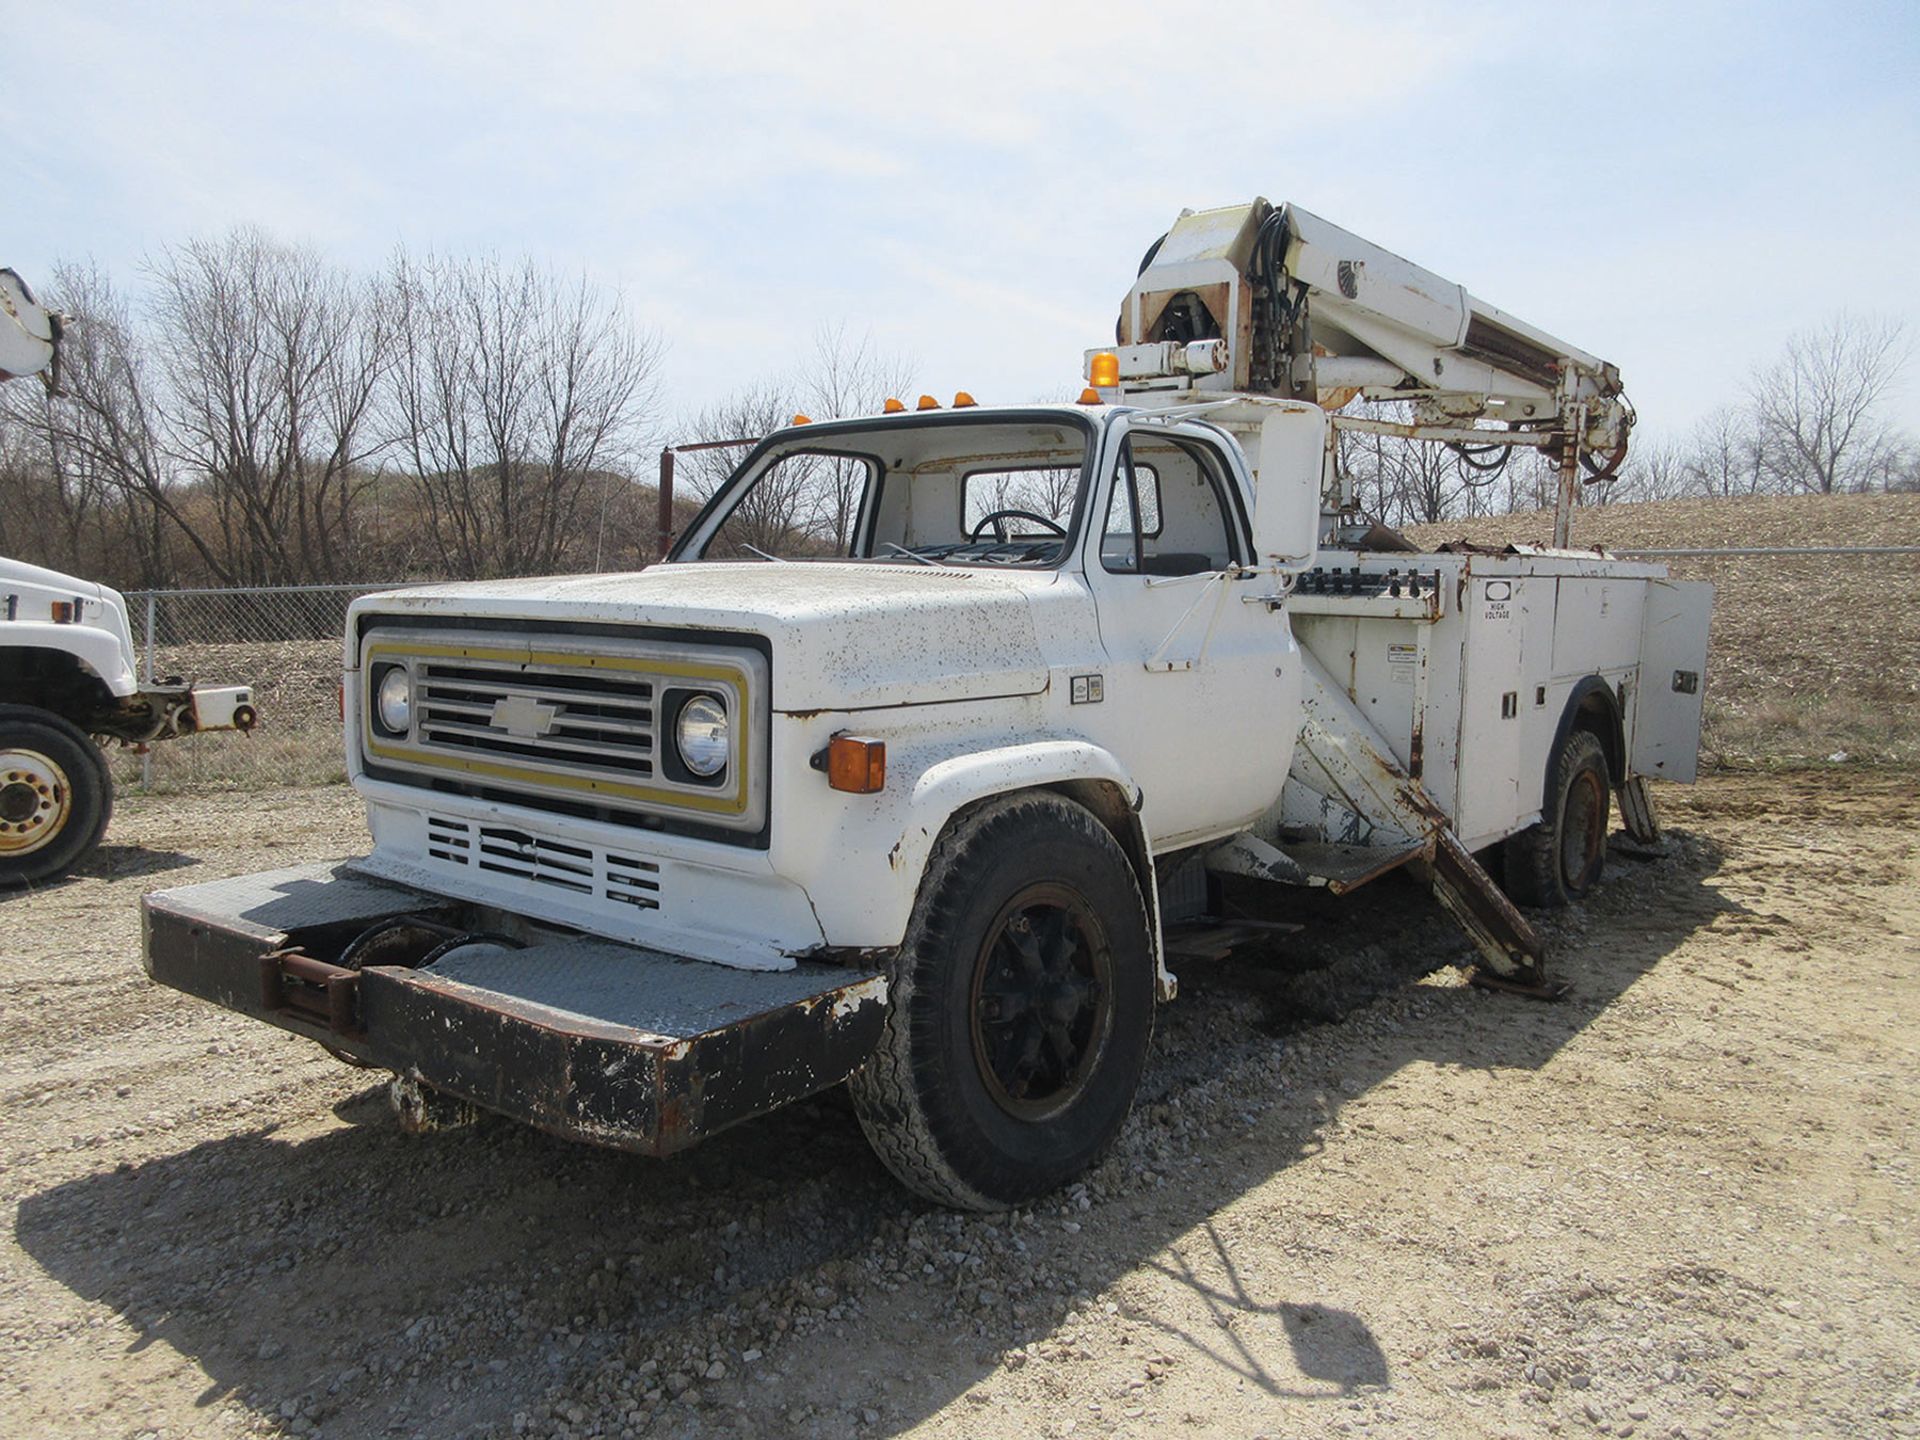 ALTEC D900A-B POLE SETTER, S/N 0085-B1278, MOUNTED ON 1985 CHEVROLET 70 DIESEL S/A UTILITY TRUCK,